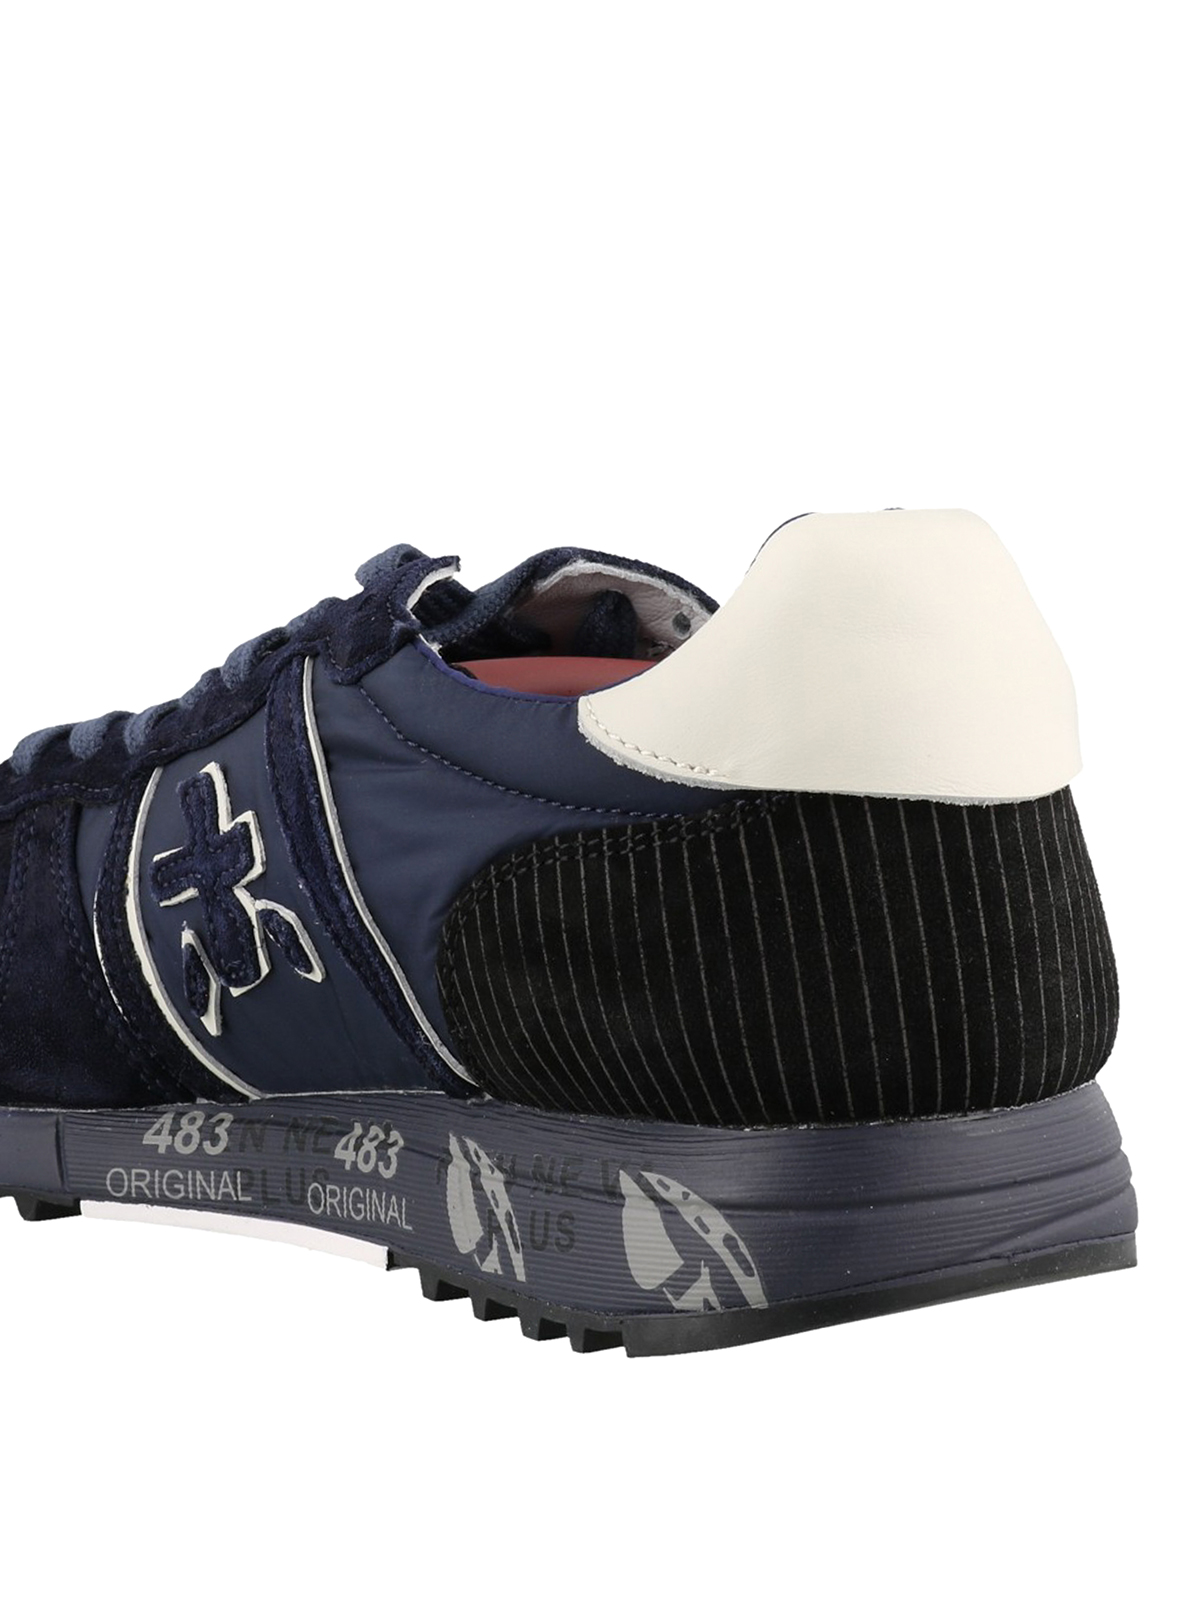 Premiata - Eric 4157 sneakers - trainers - ERIC4157 | Shop online at iKRIX